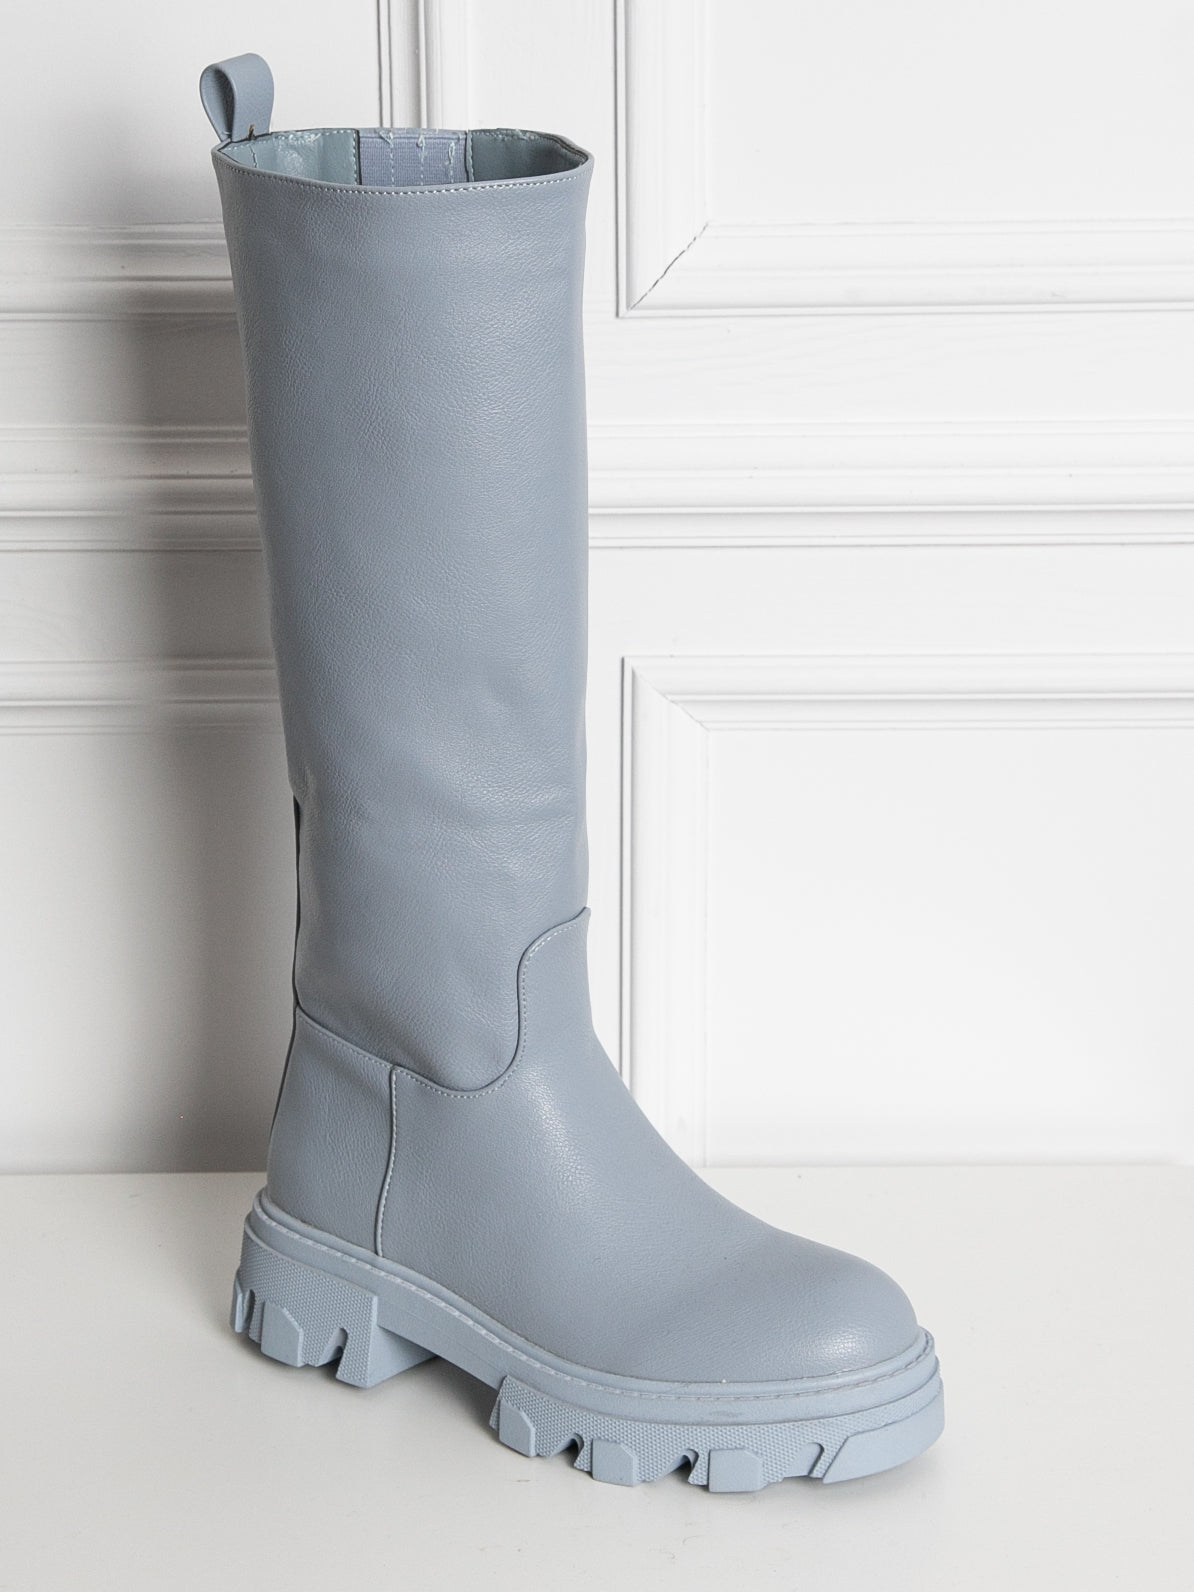 Long boots with plain sole